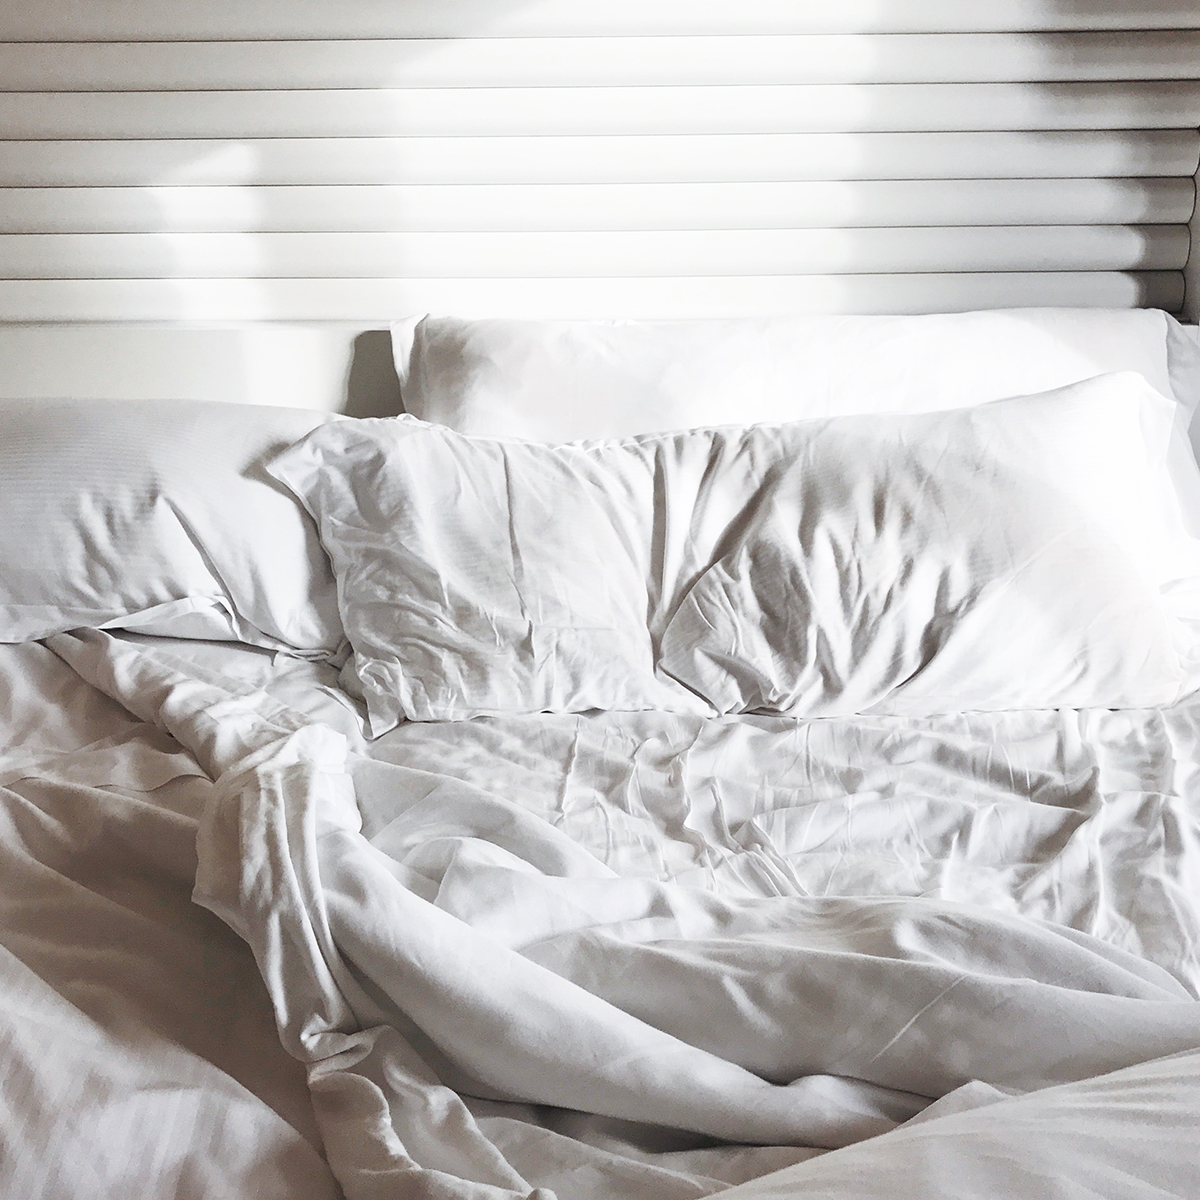 Do These 3 Things Before Bed to Fall Asleep Faster